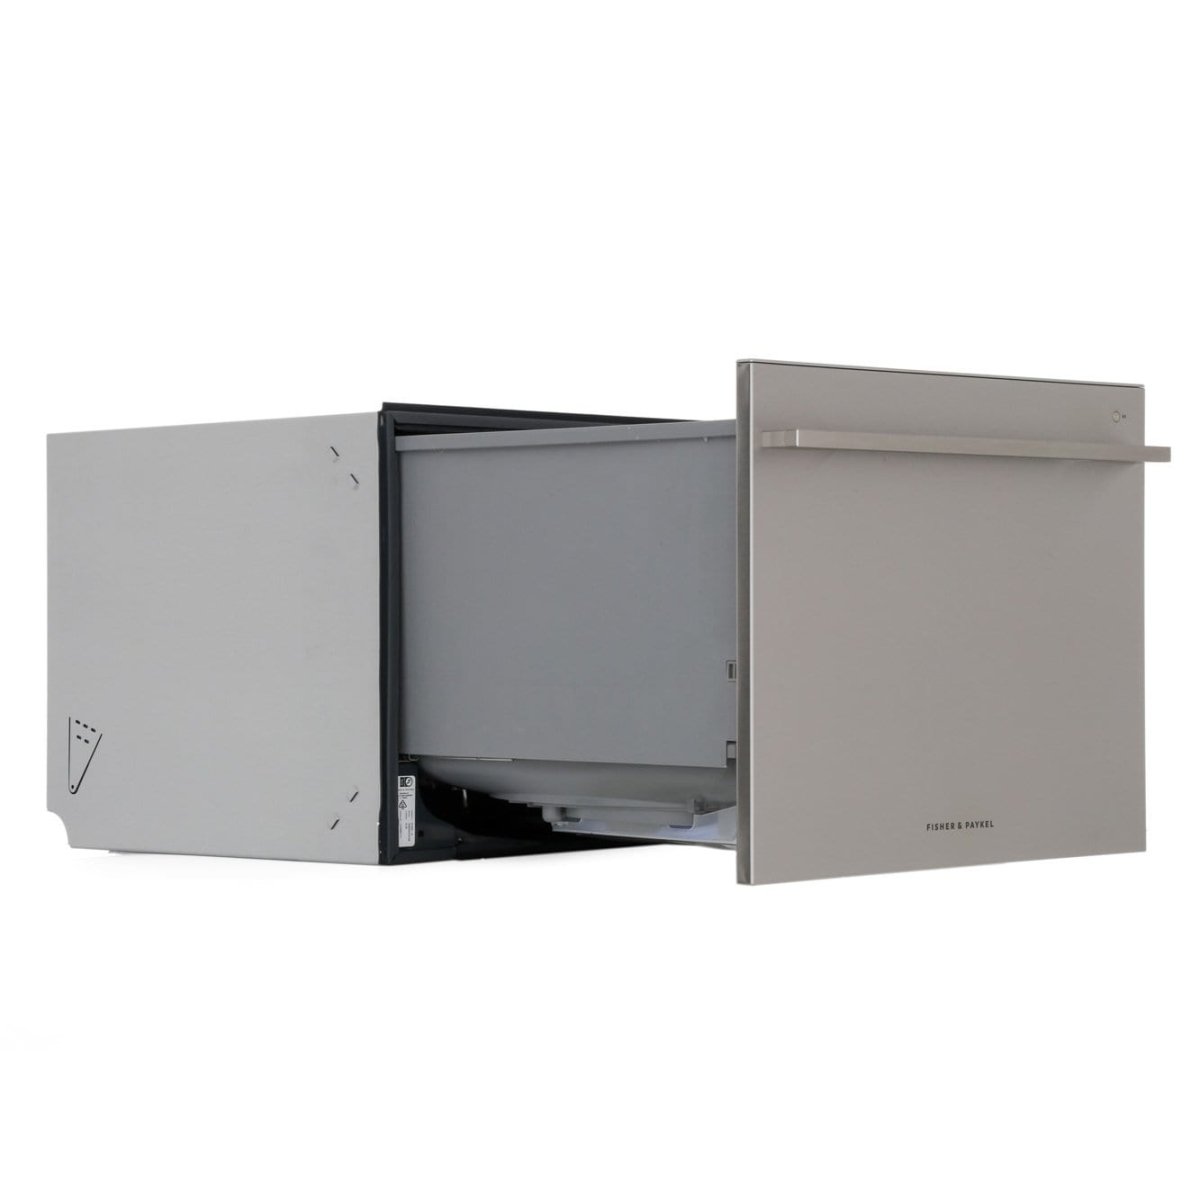 Fisher & Paykel DD60SDFHTX9 6 Plate Fully Integrated Dishwasher Dish Drawer Stainless Steel Control Panel with Fixed Door - Atlantic Electrics